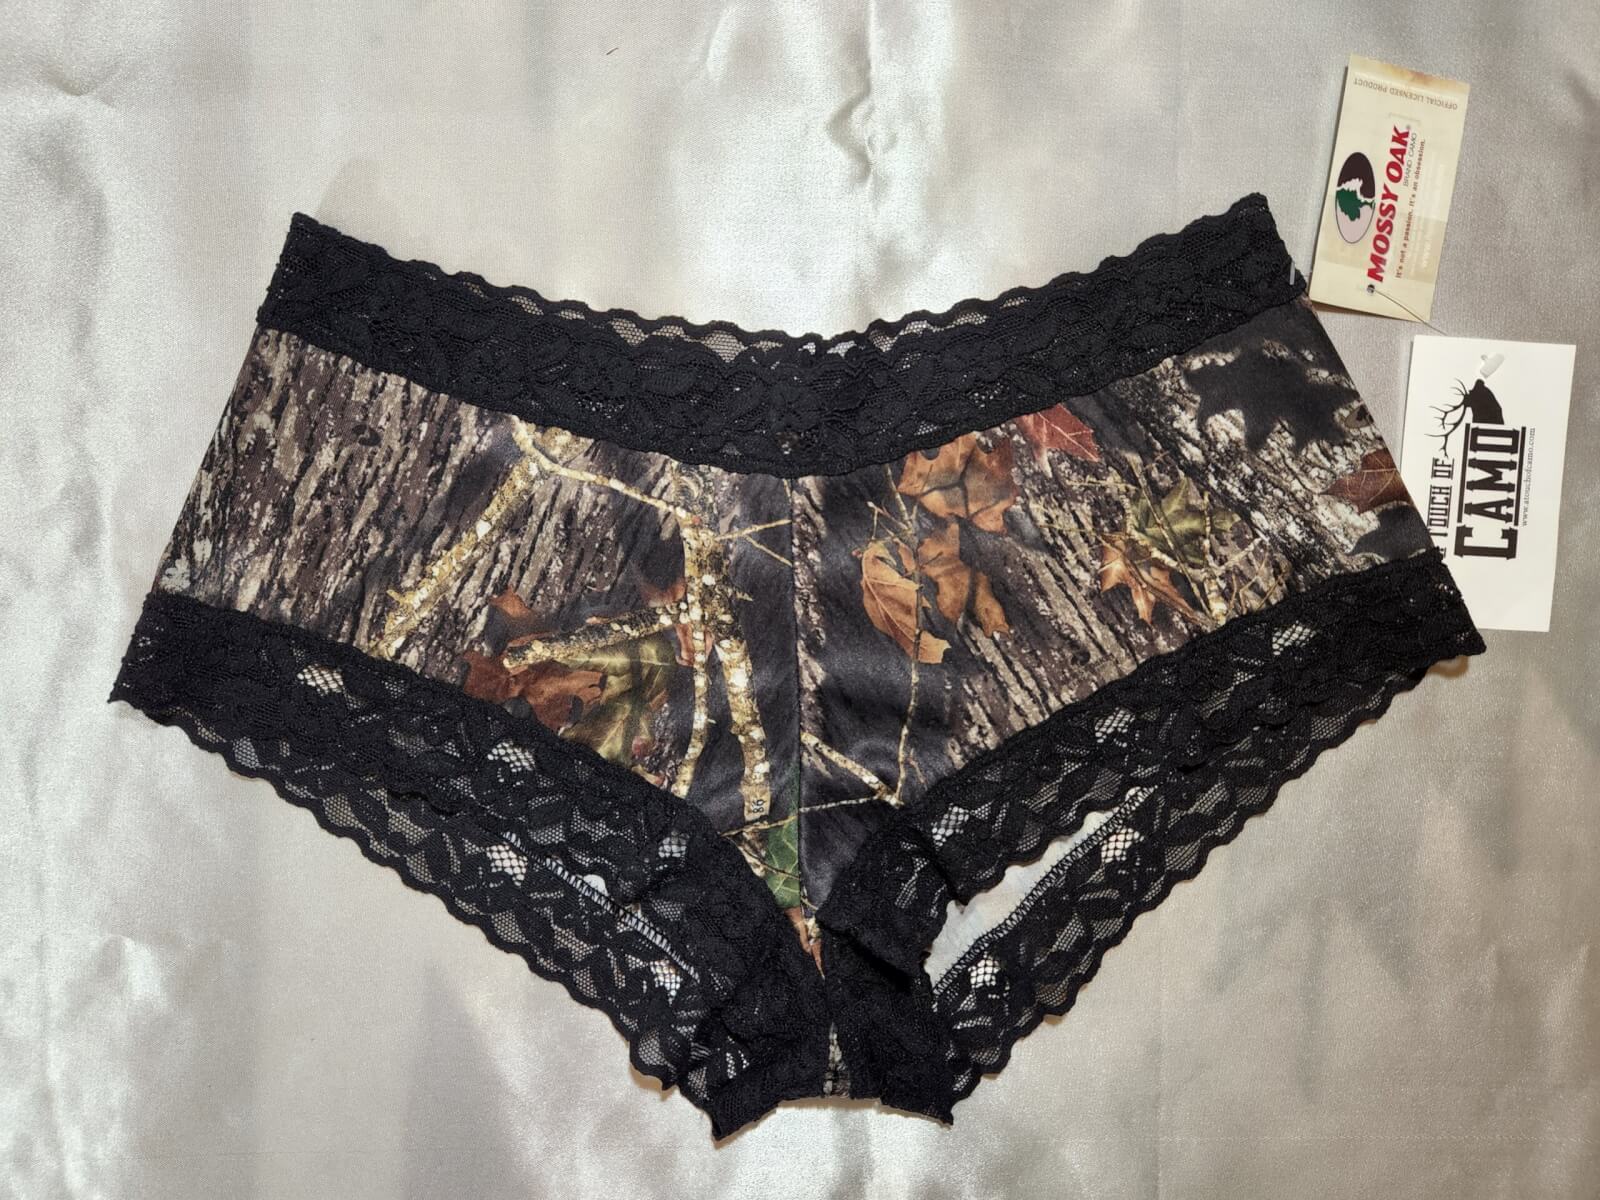 Lace Trimmed Boy Short Panty in Mossy Oak Camo Size M - A Touch of Camo